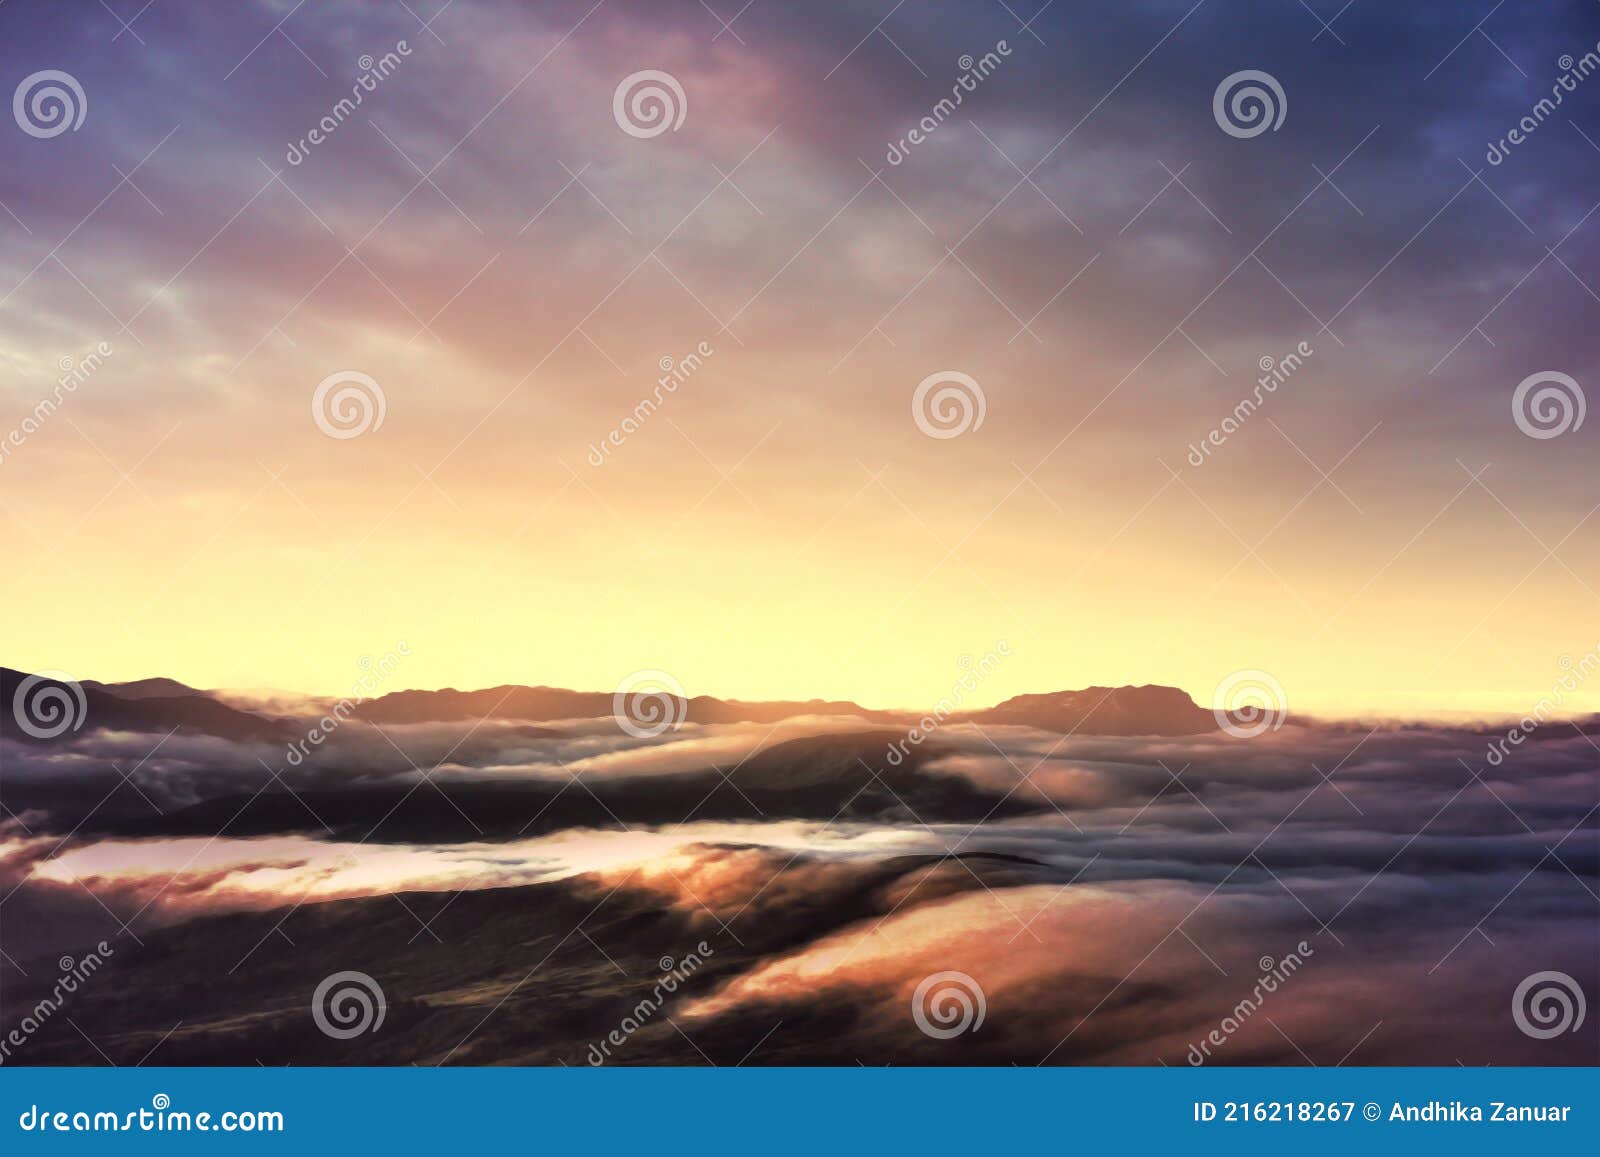 Clouds Like the Sea at Sunset Stock Image - Image of sunset, editing:  216218267